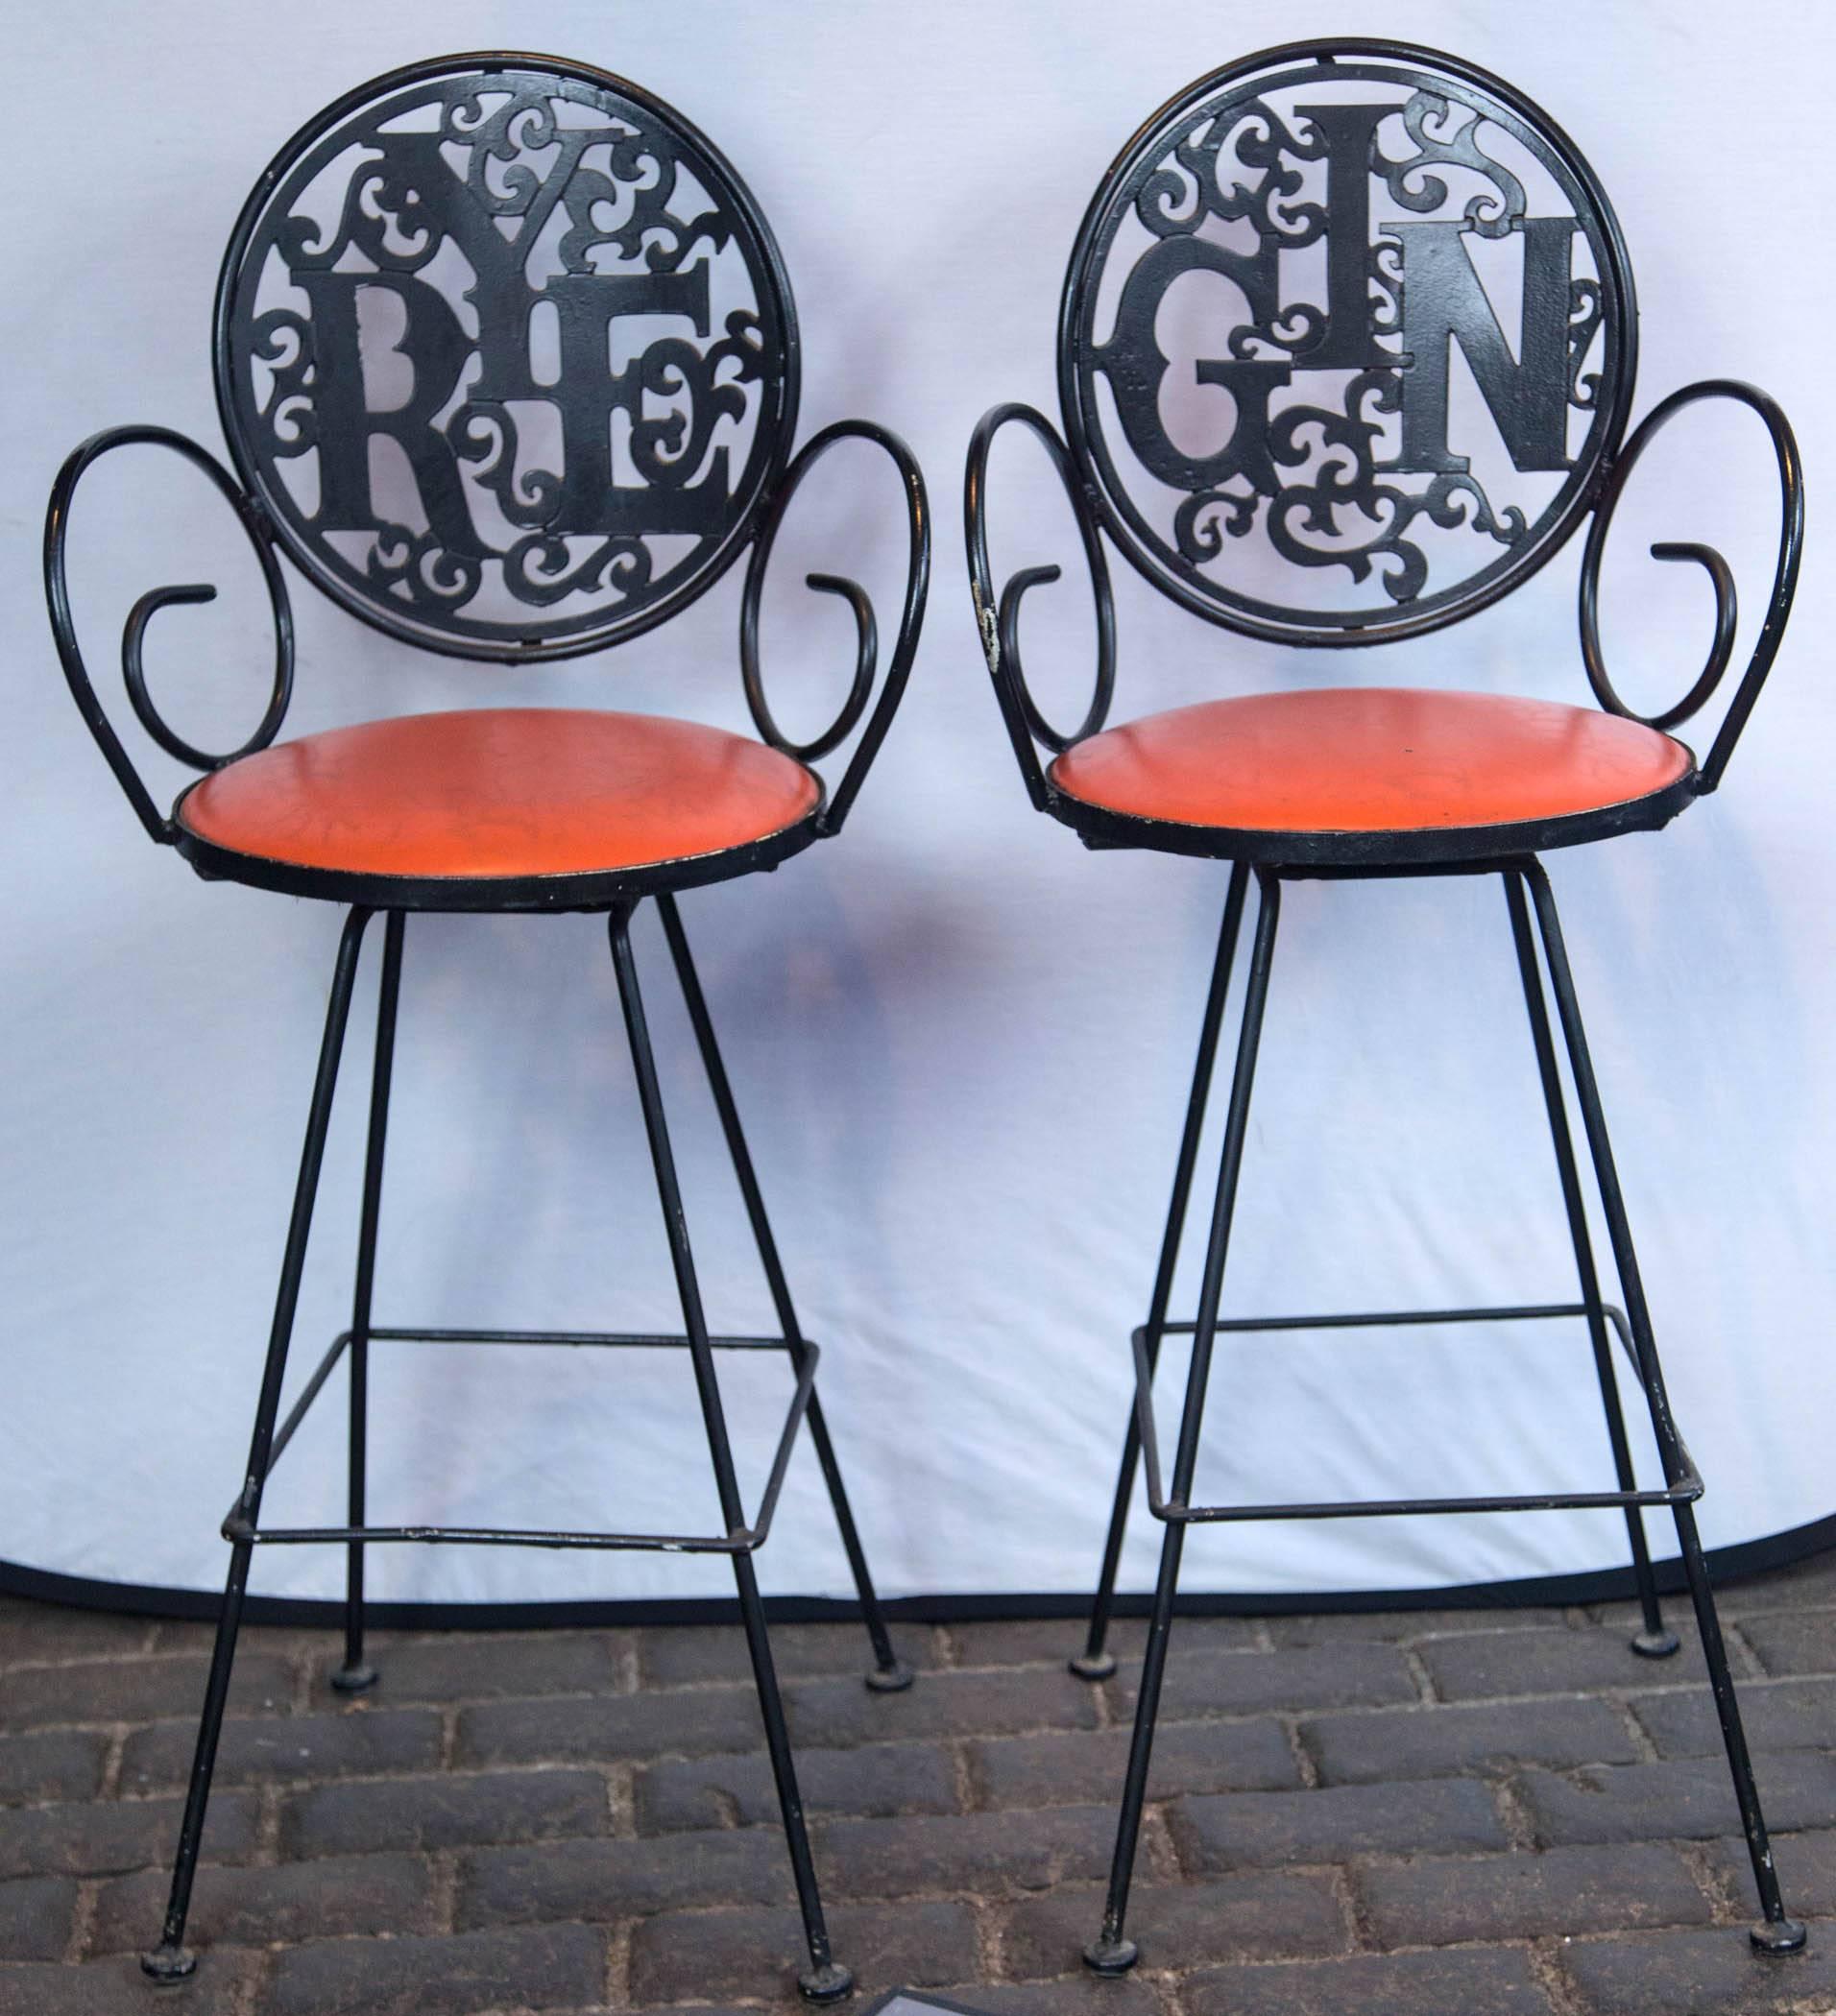 The swinging 1960s! Two 1960s wrought iron stools by Arthur Umanoff, Rye and Gin with orange vinyl seats. Seat height is 29.5 inches.